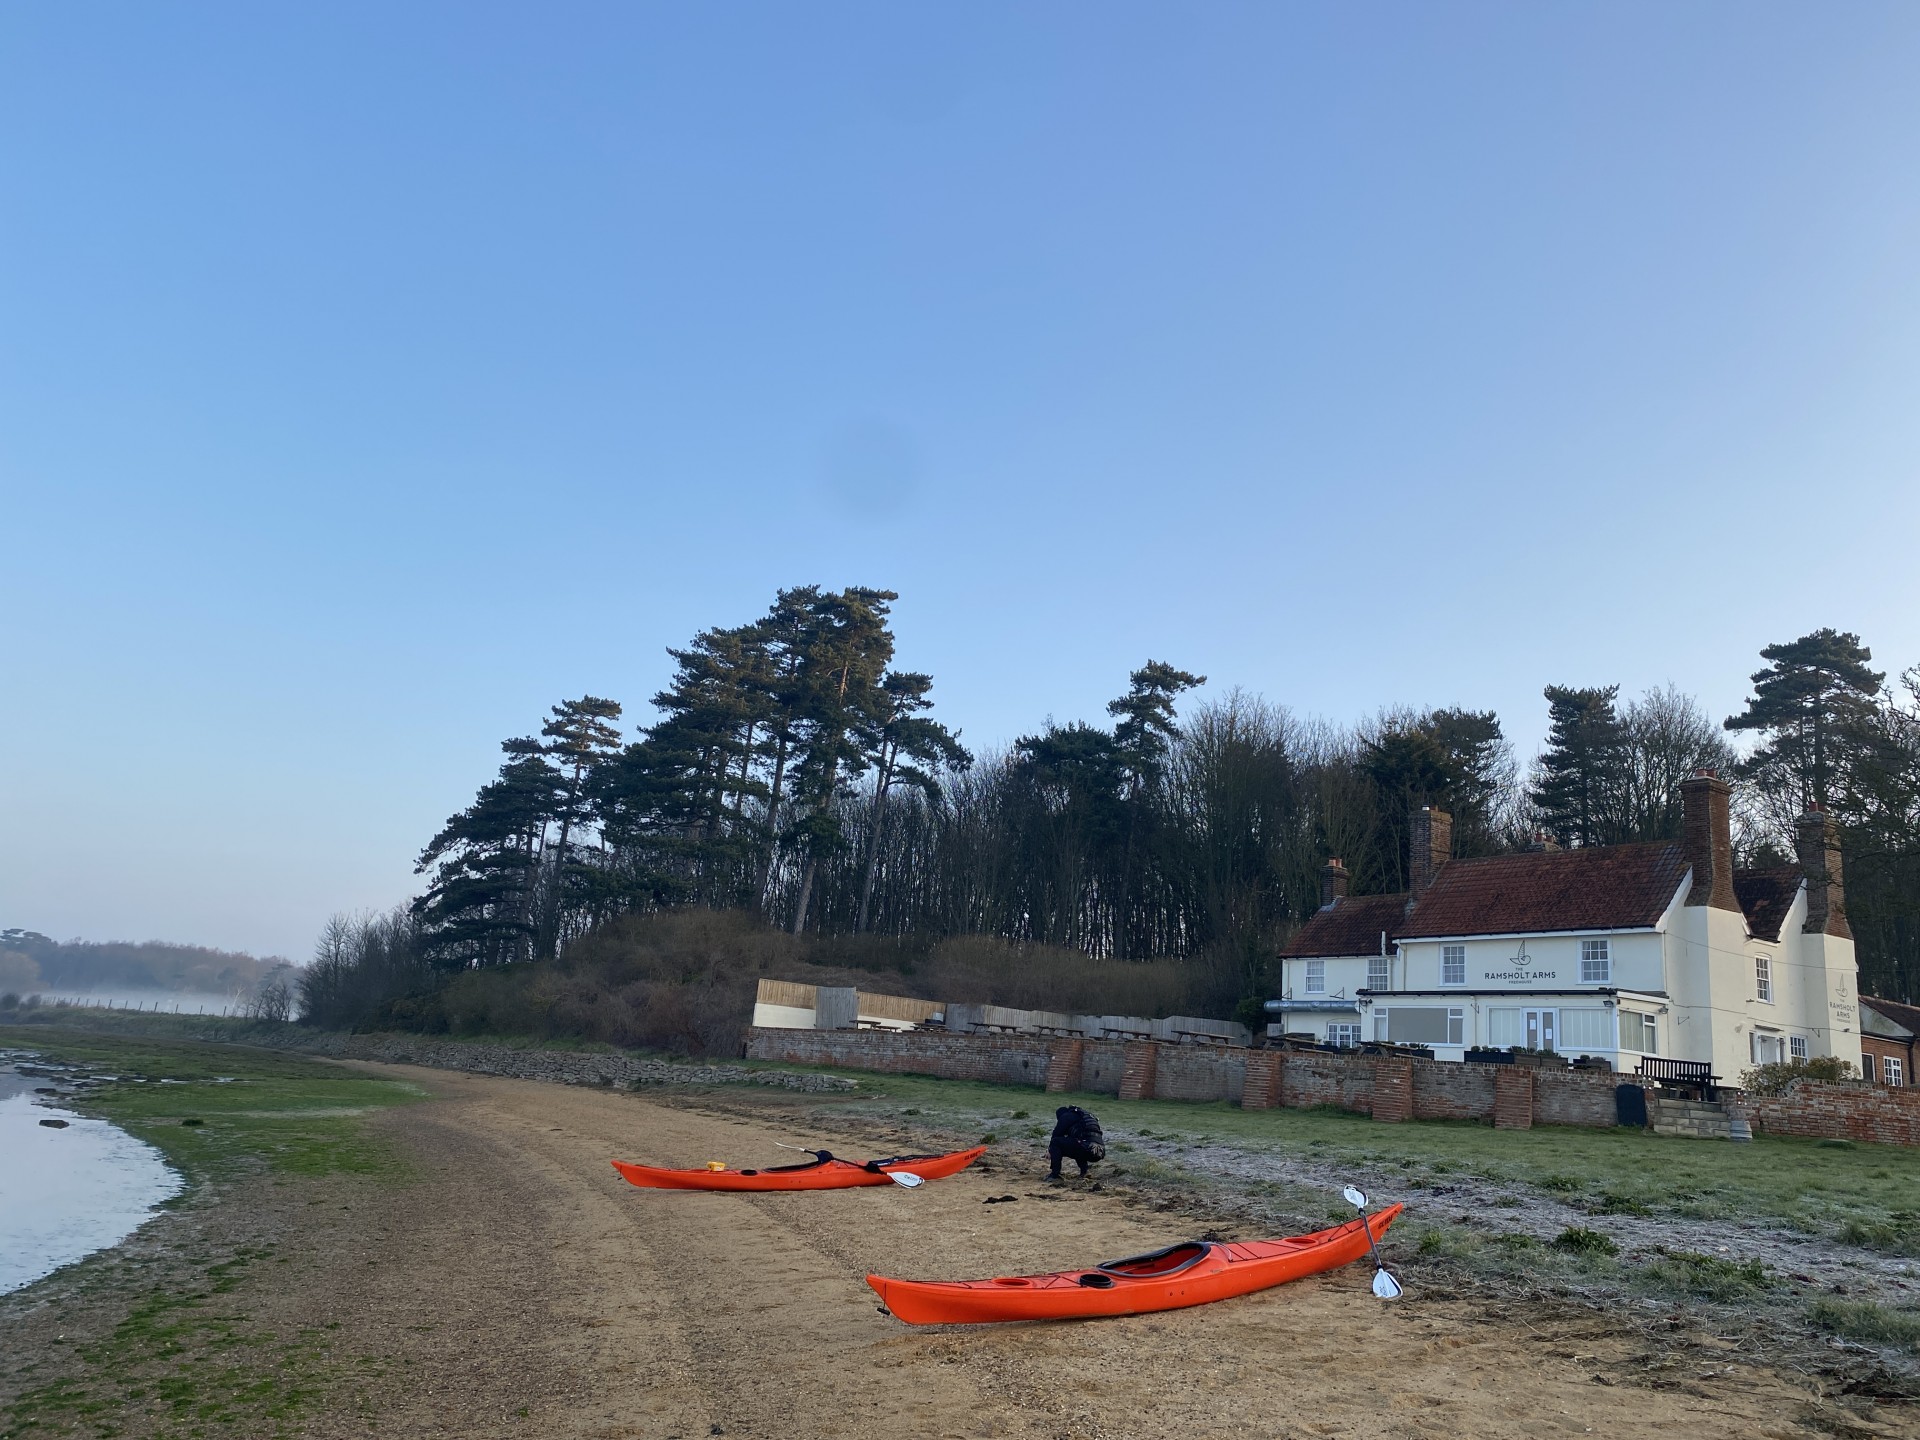 The beach at Ramsholt with two orange sea kayaks and a blue sky.